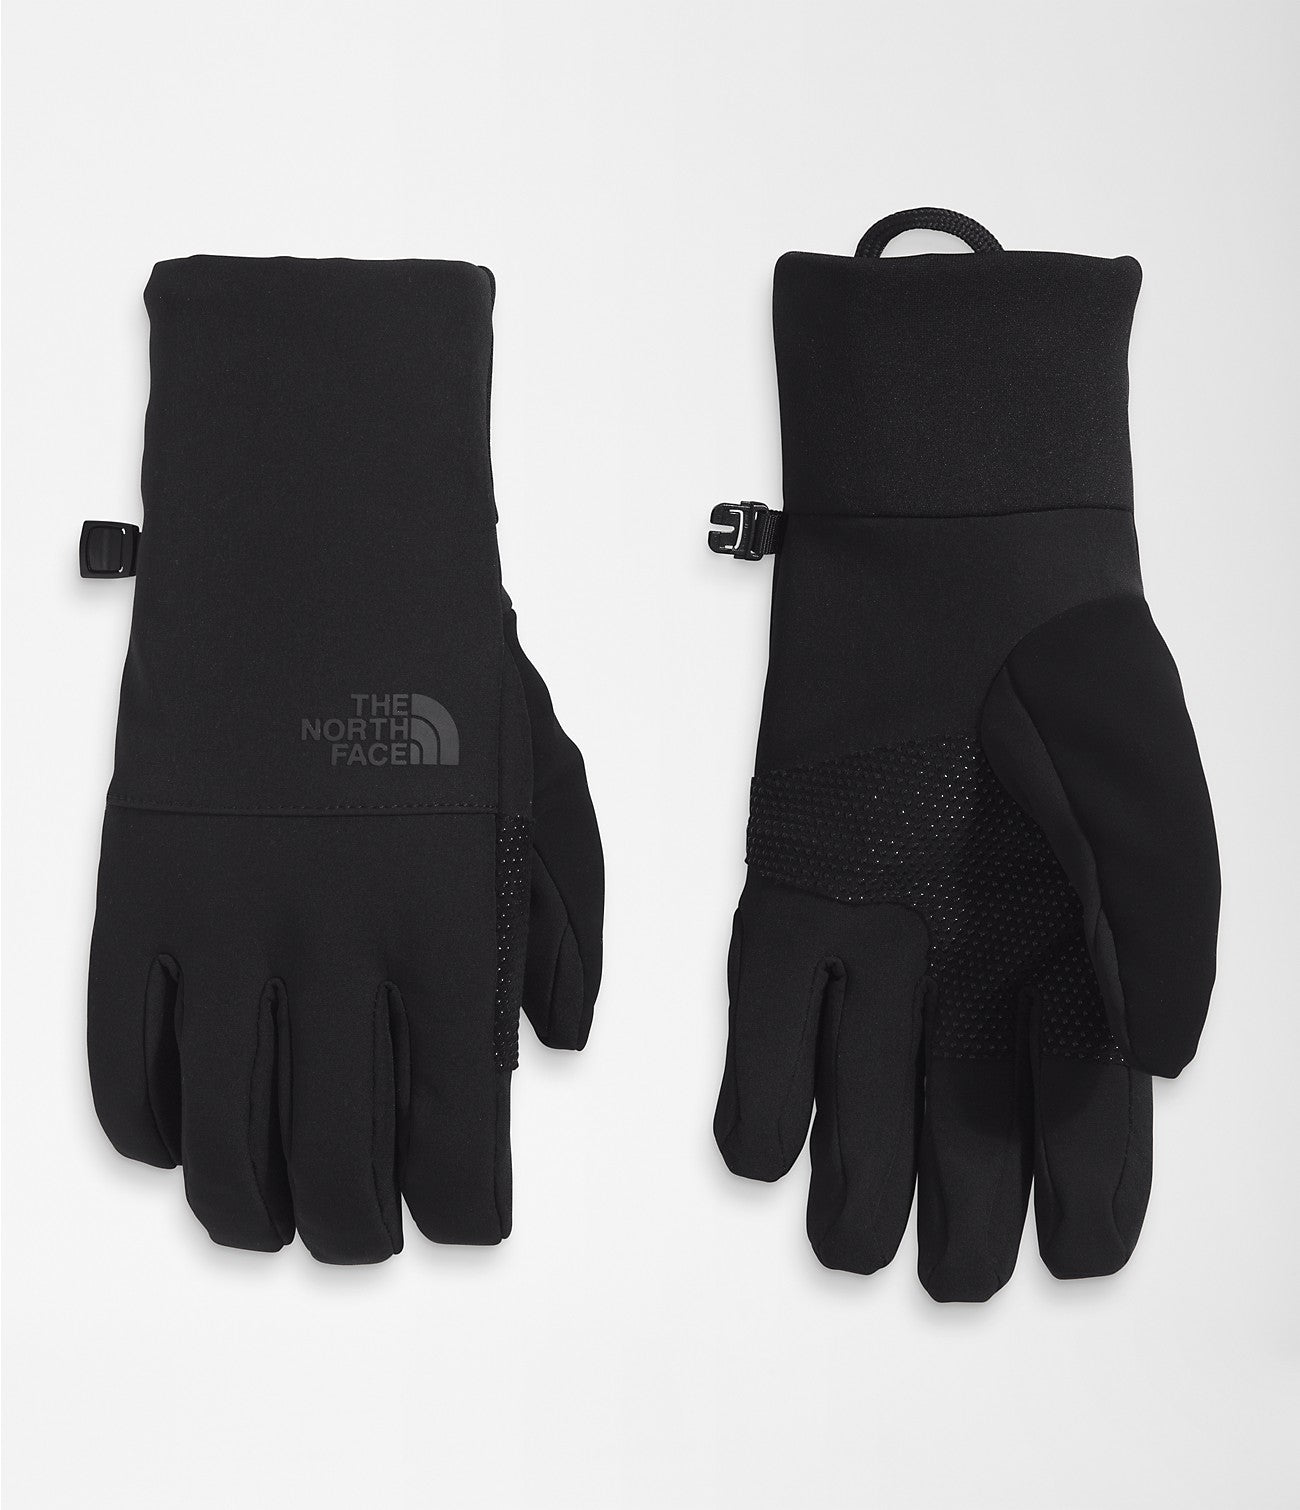 The North Face Women’s Apex Insulated Etip Gloves